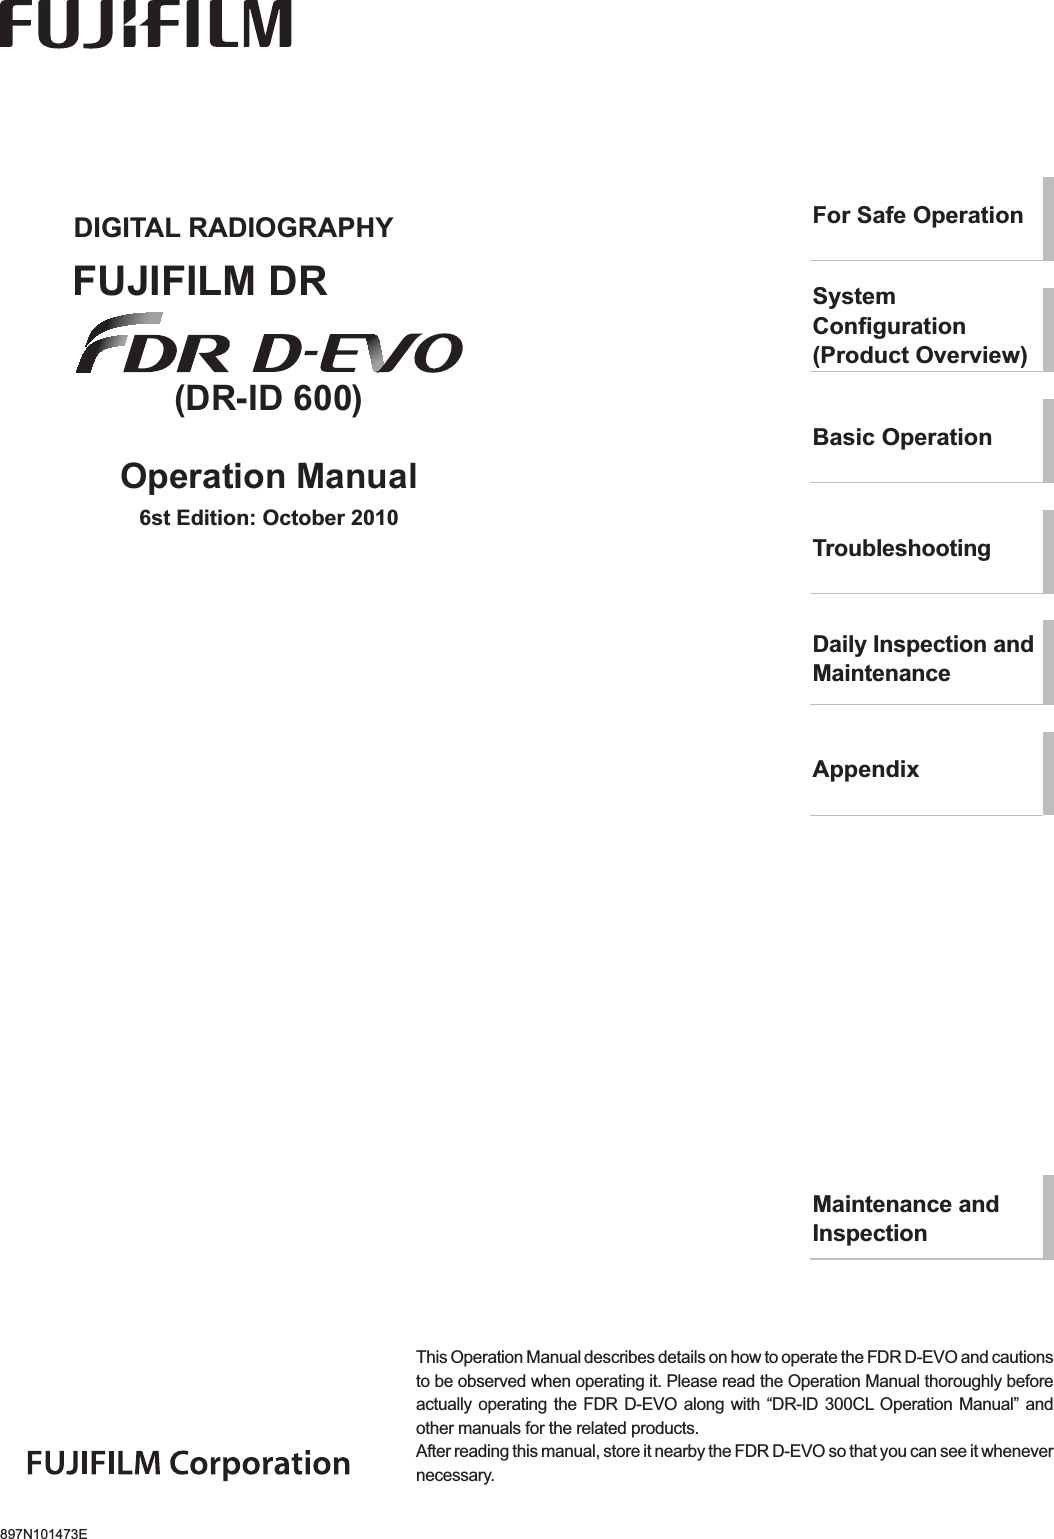 897N101473EThis Operation Manual describes details on how to operate the FDR D-EVO and cautions to be observed when operating it. Please read the Operation Manual thoroughly before actually operating the FDR D-EVO along with “DR-ID 300CL Operation Manual” and other manuals for the related products.After reading this manual, store it nearby the FDR D-EVO so that you can see it whenever necessary.DIGITAL RADIOGRAPHYFUJIFILM DR(DR-ID 600)Operation Manual6st Edition: October 2010For Safe OperationSystem&amp;RQ¿JXUDWLRQ(Product Overview)Basic Operation7URXEOHVKRRWLQJDaily Inspection and MaintenanceAppendixMaintenance and Inspection